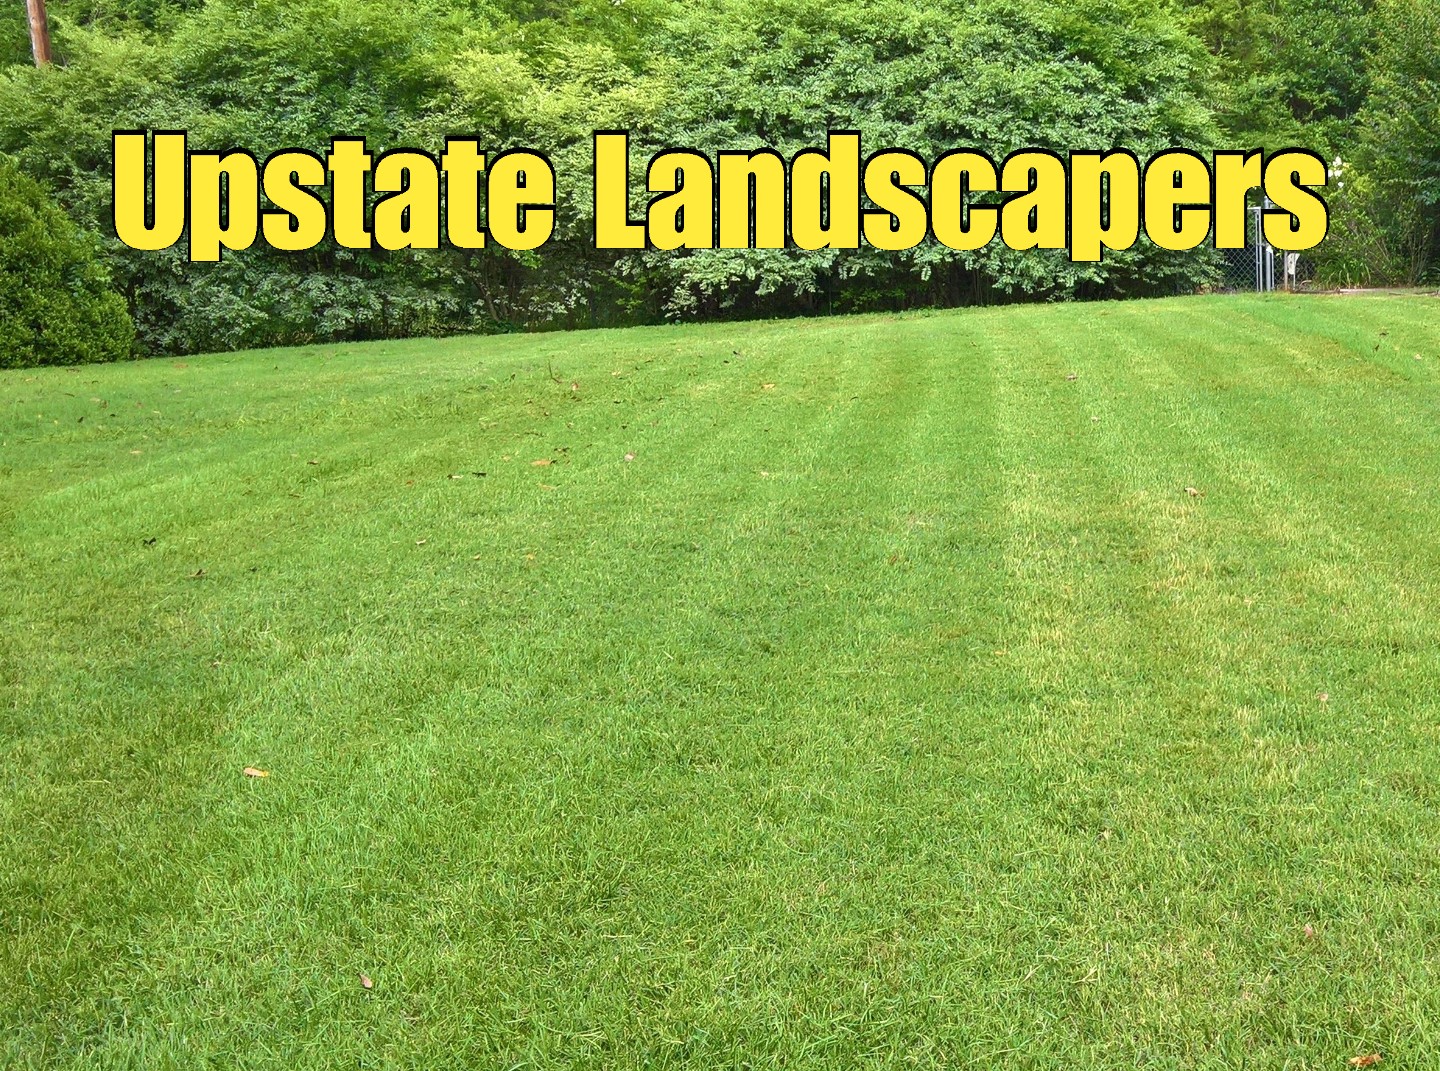 Upstate Landscapers Anderson Sc 29625, Landscaping Anderson Sc